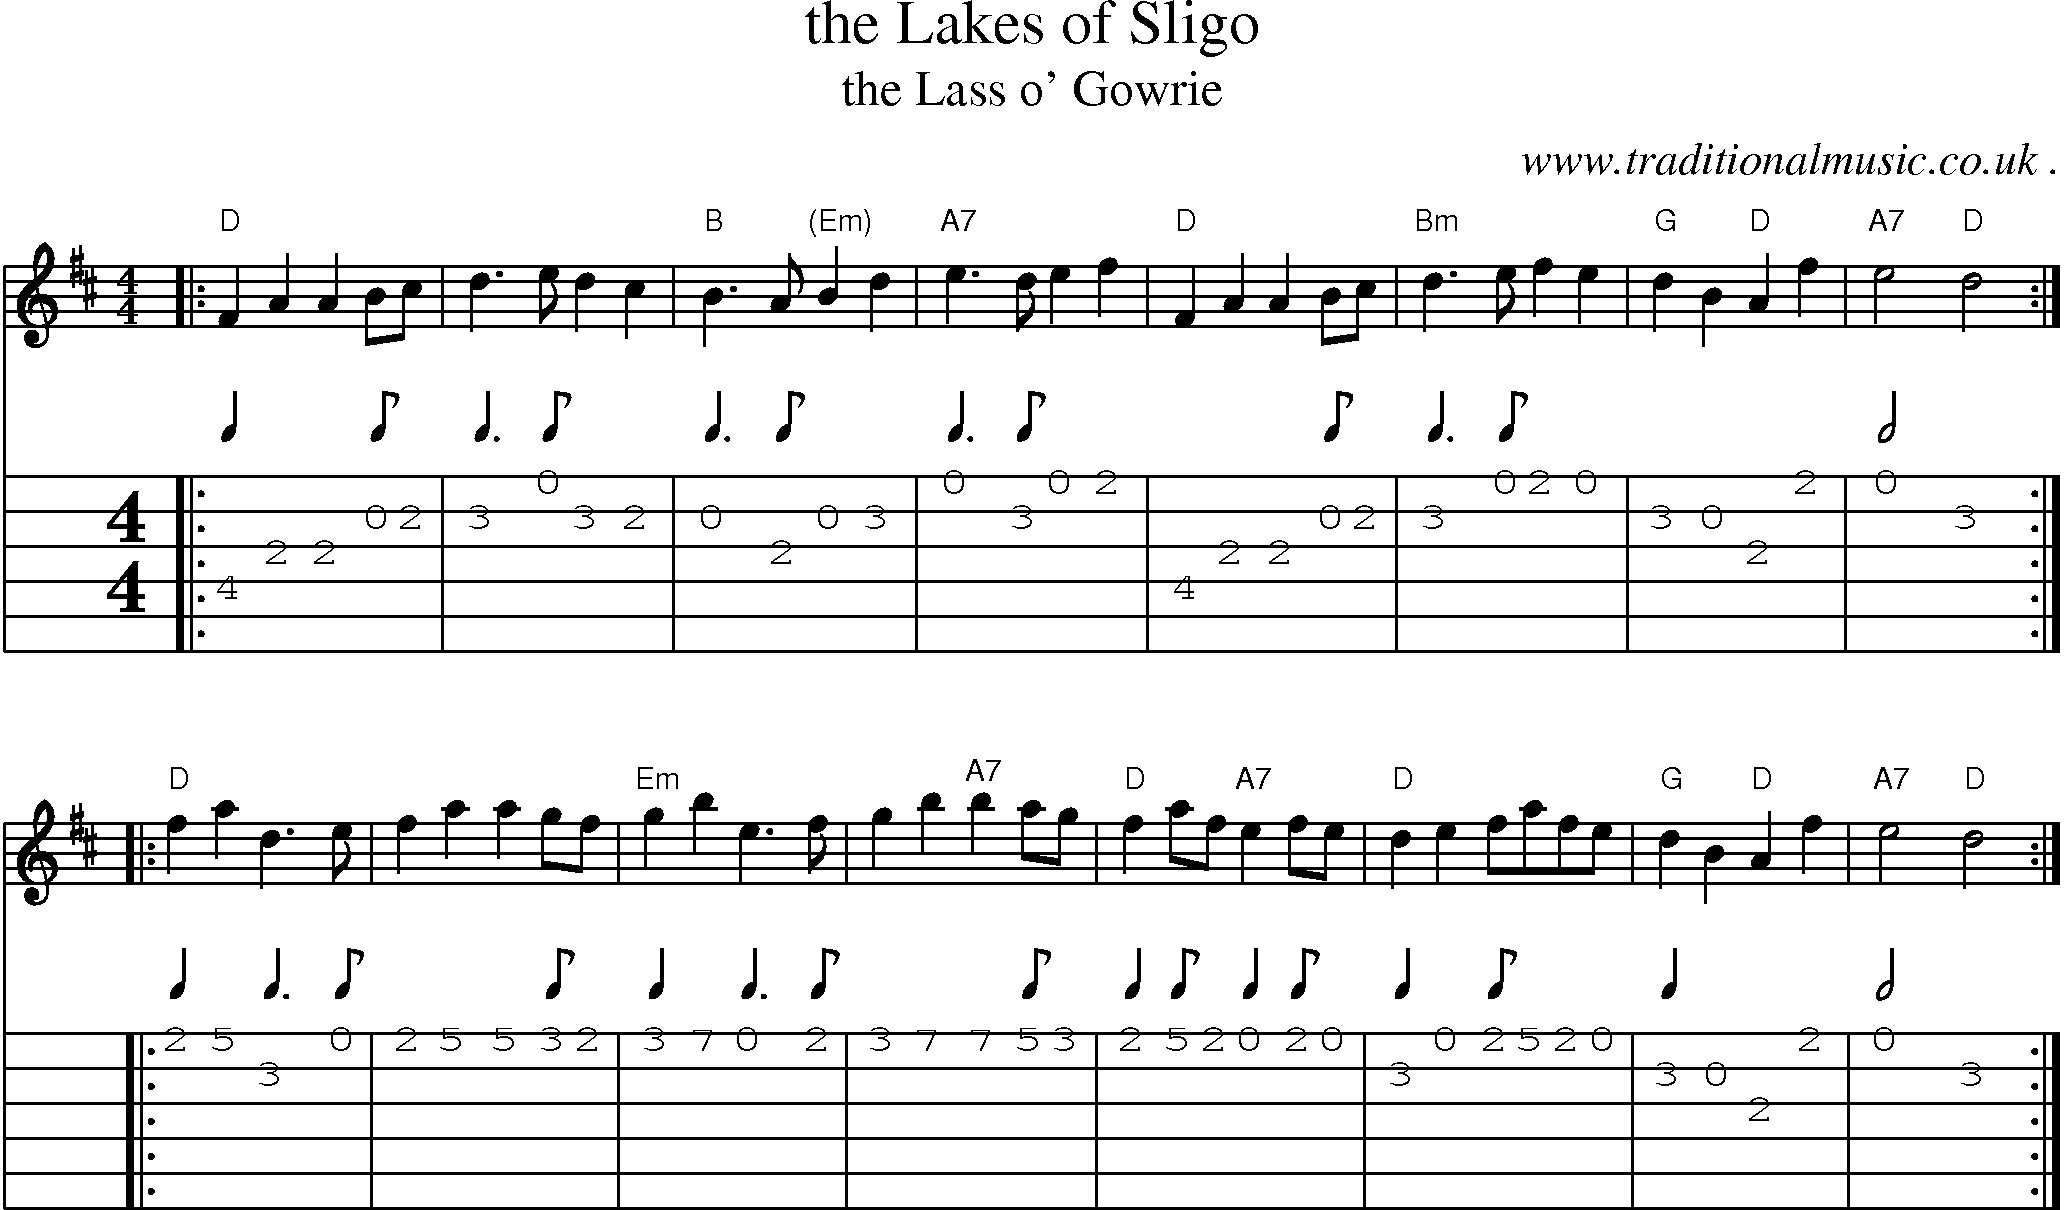 Sheet-music  score, Chords and Guitar Tabs for The Lakes Of Sligo